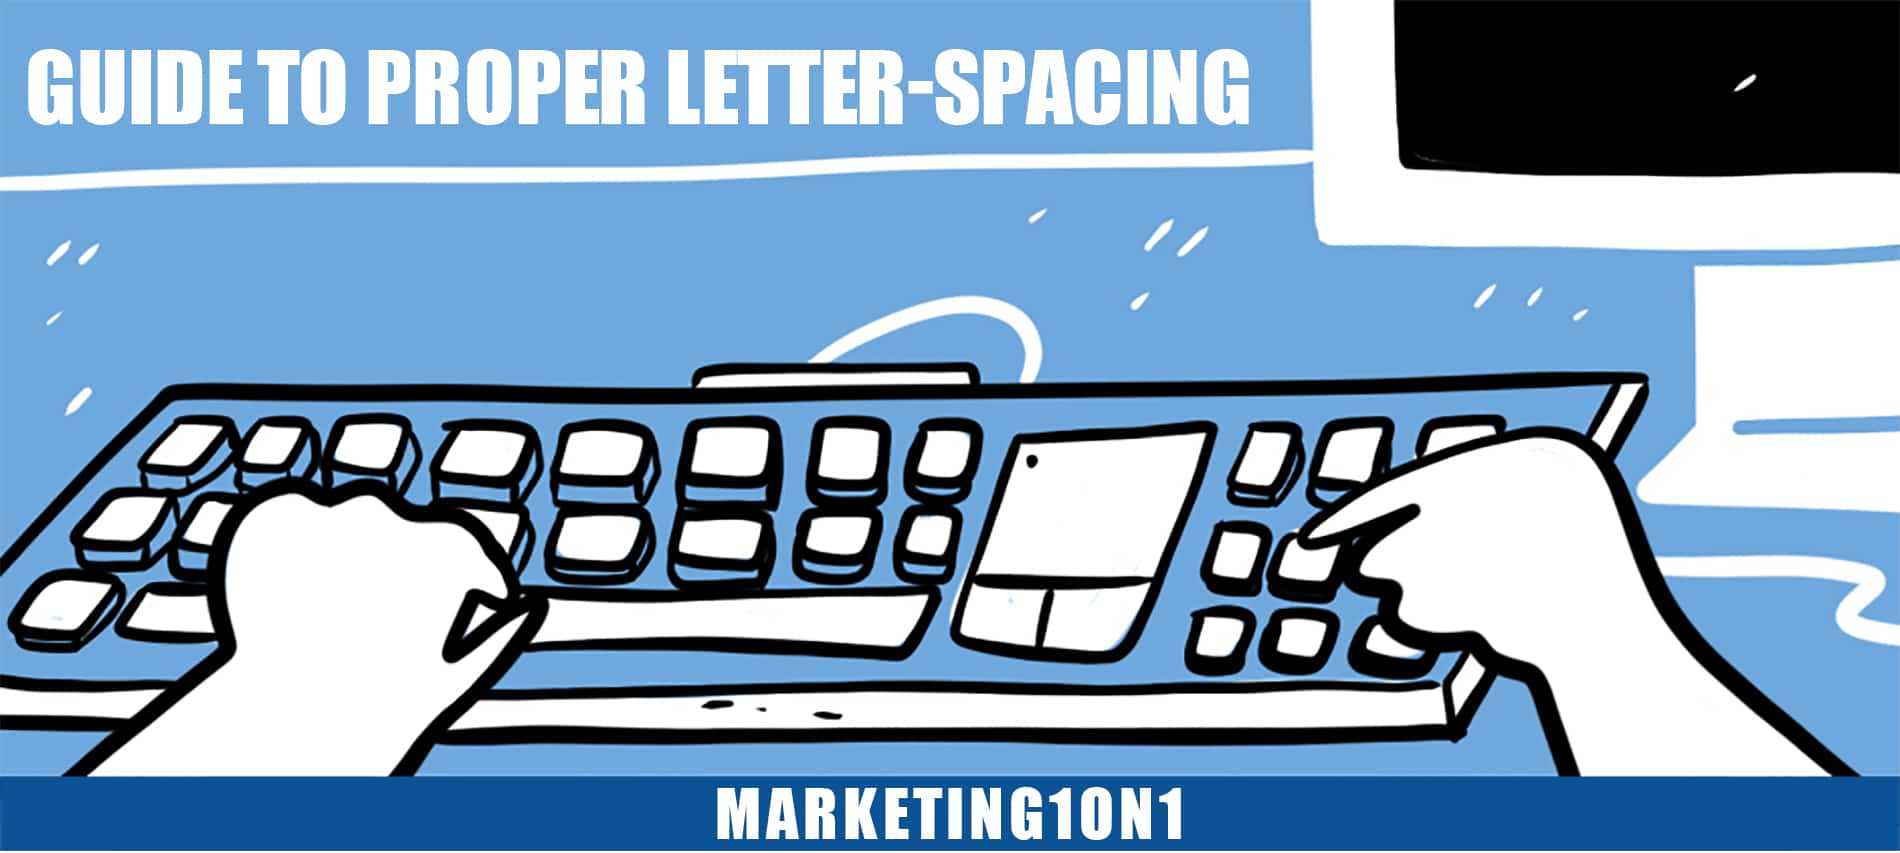 Guide to proper letter-spacing